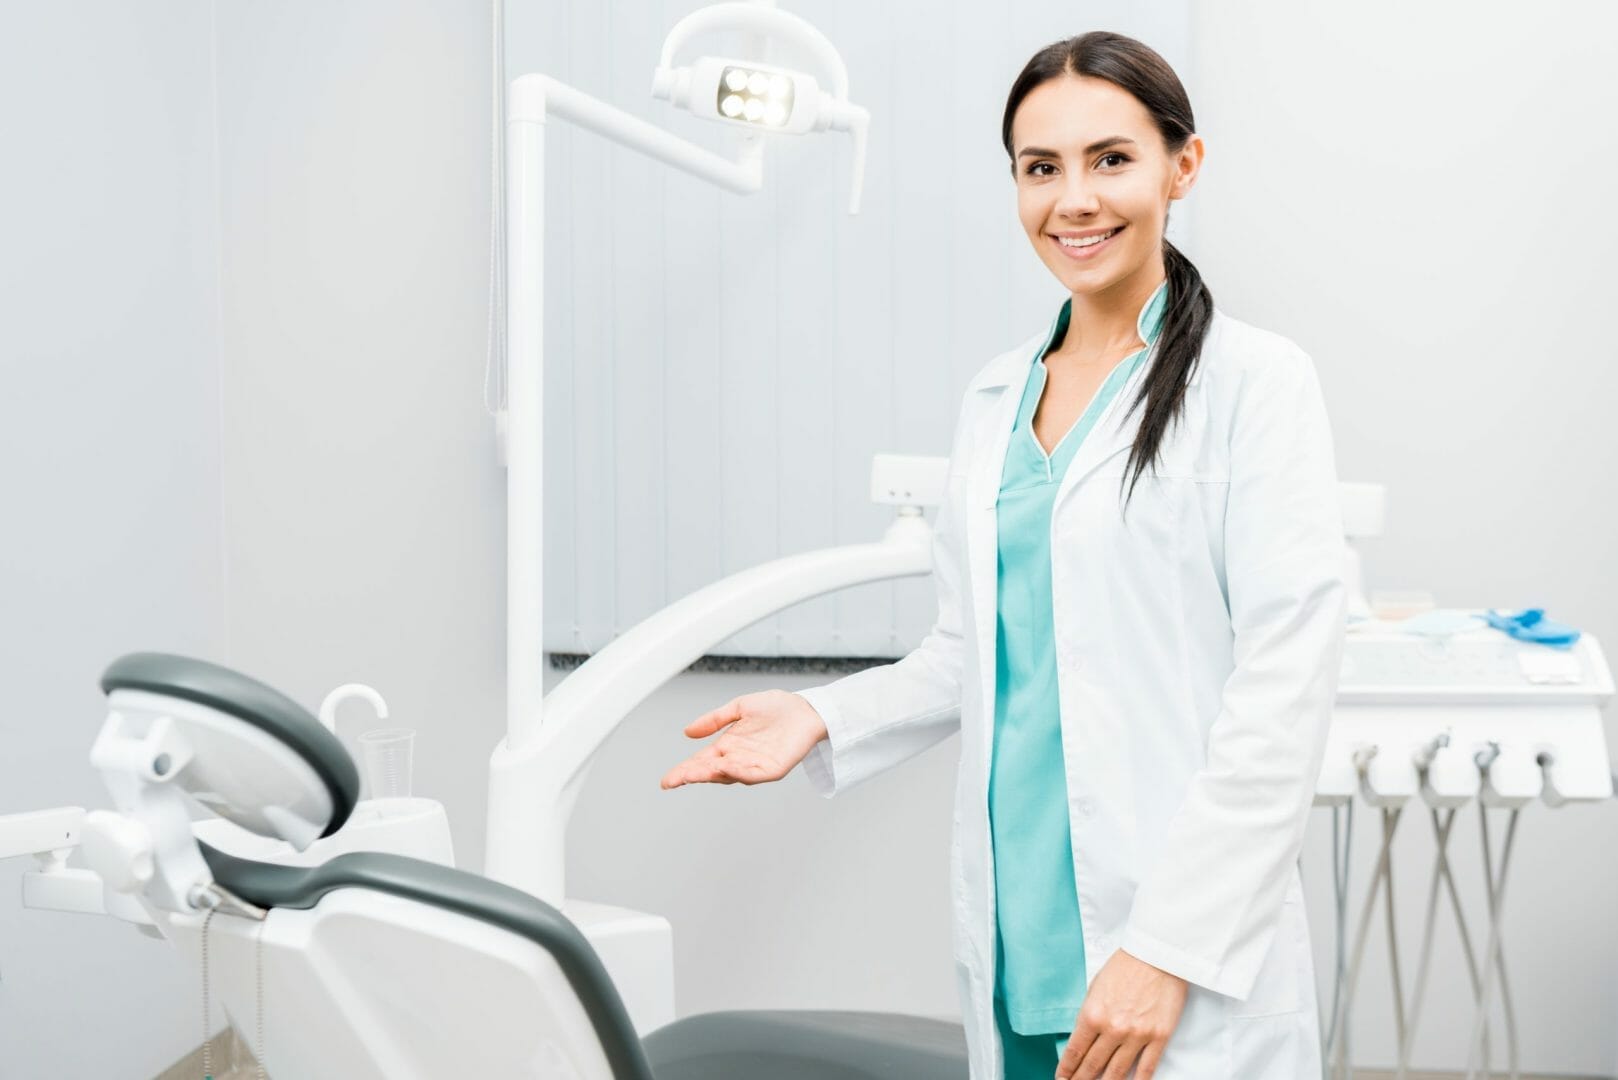 Are You In Need of an Emergency Dentist in Mississauga? We’re Your 911 for Dental Care!